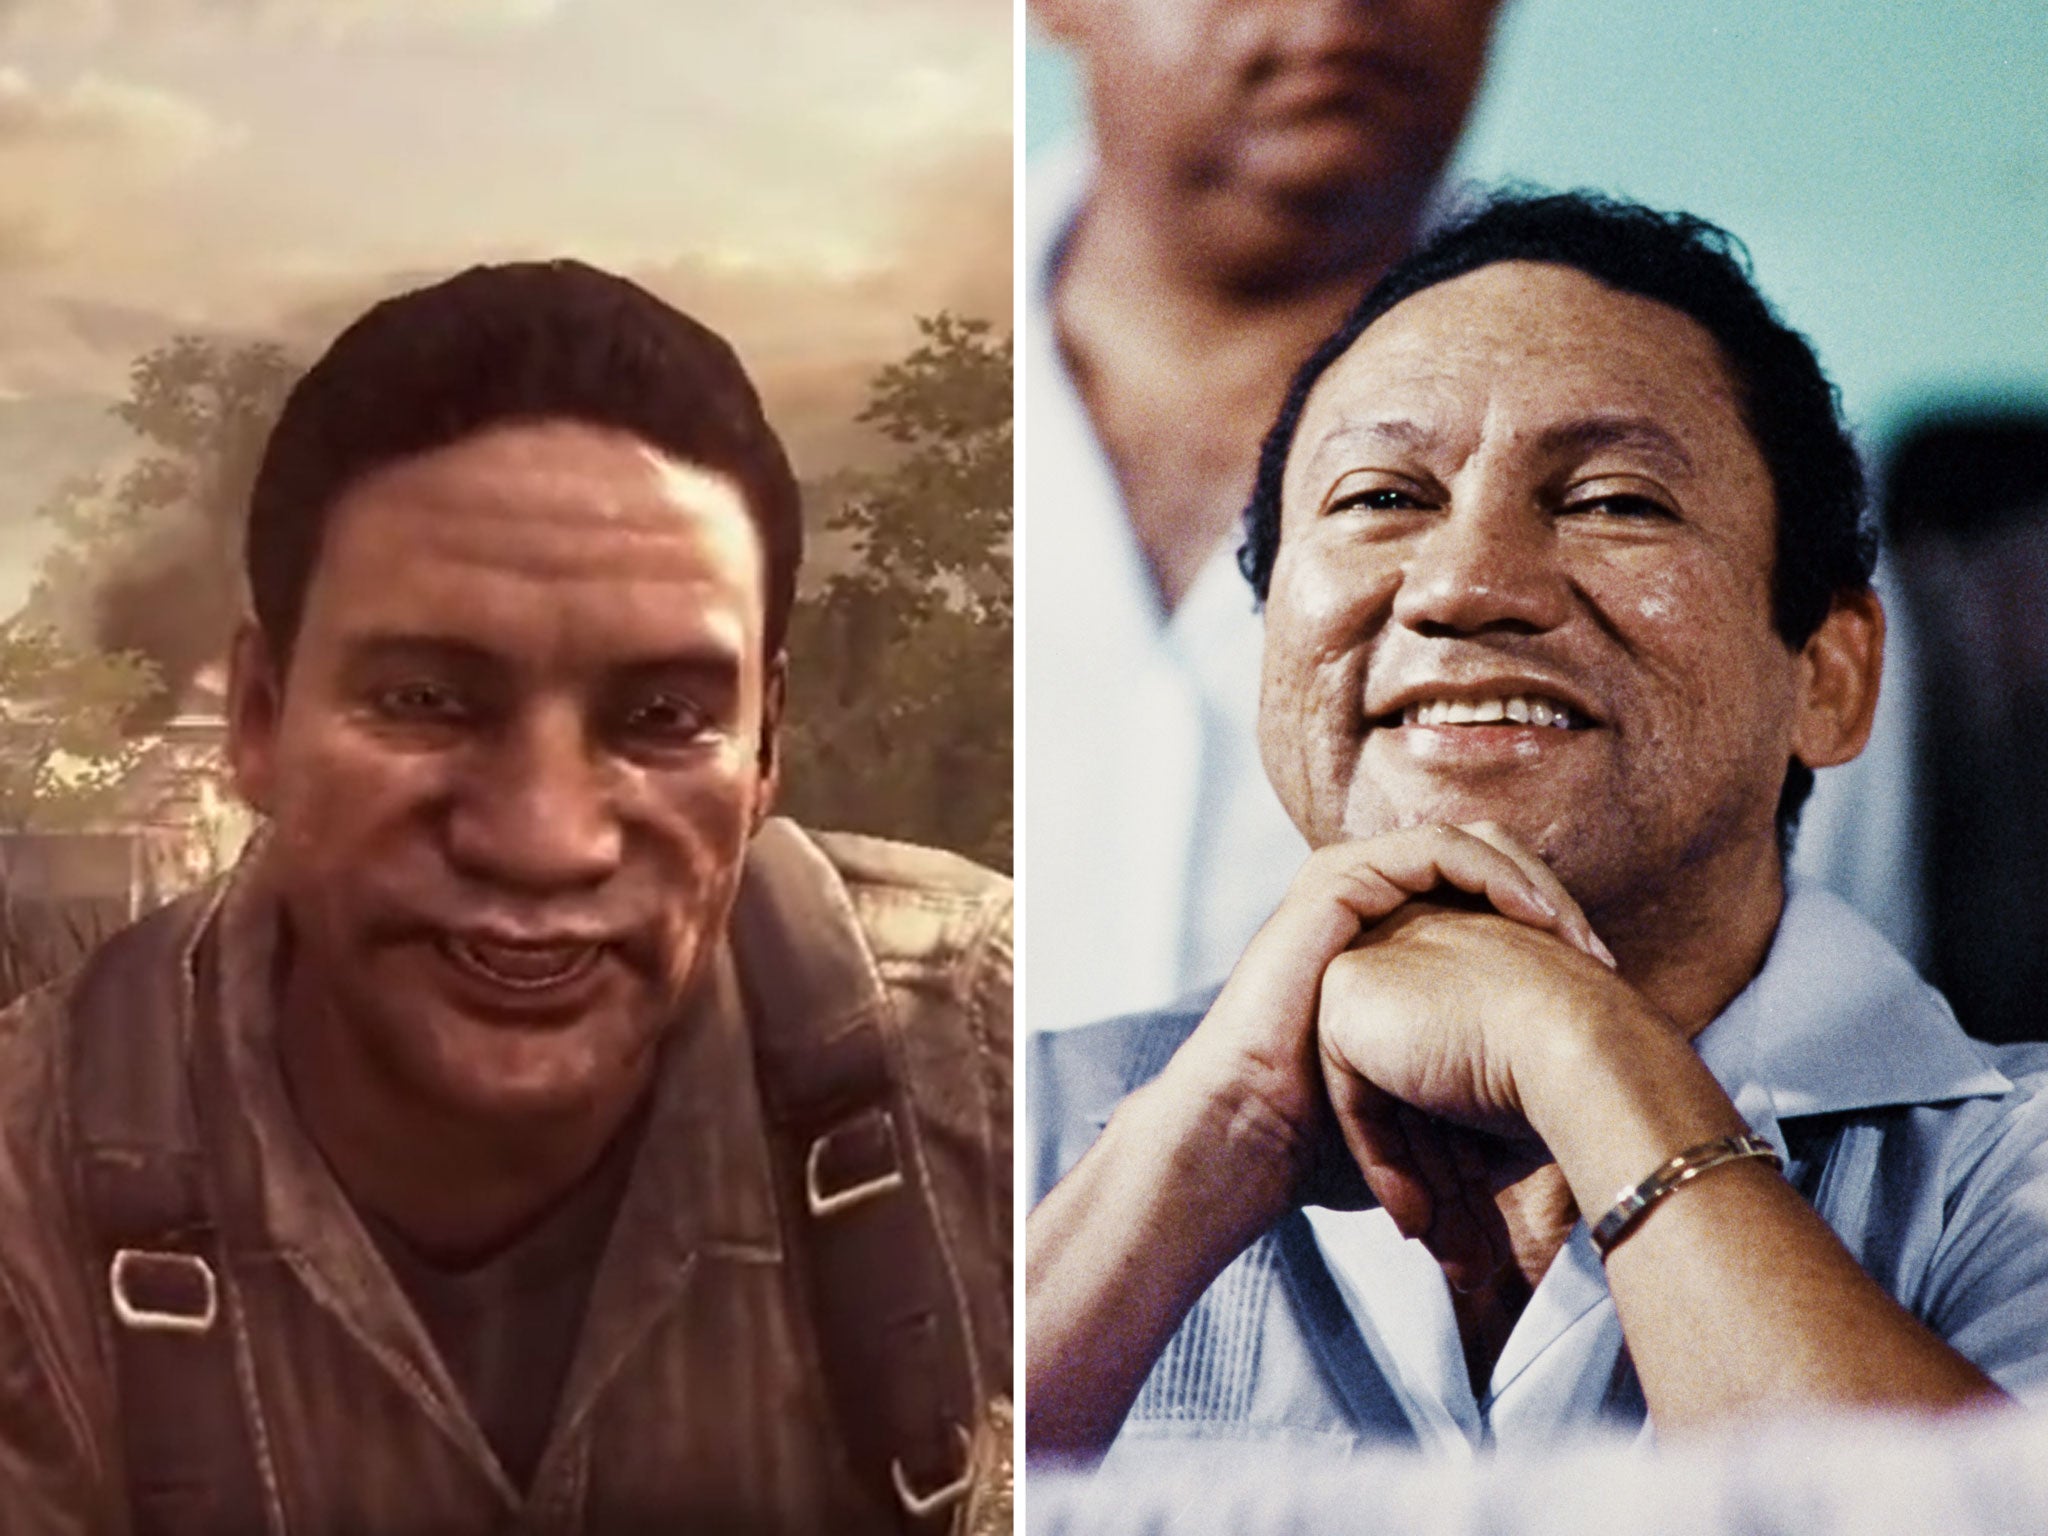 The former dictator of Panama Manuel Noriega is suing the makers of Call of Duty over his portrayal in the game (left)